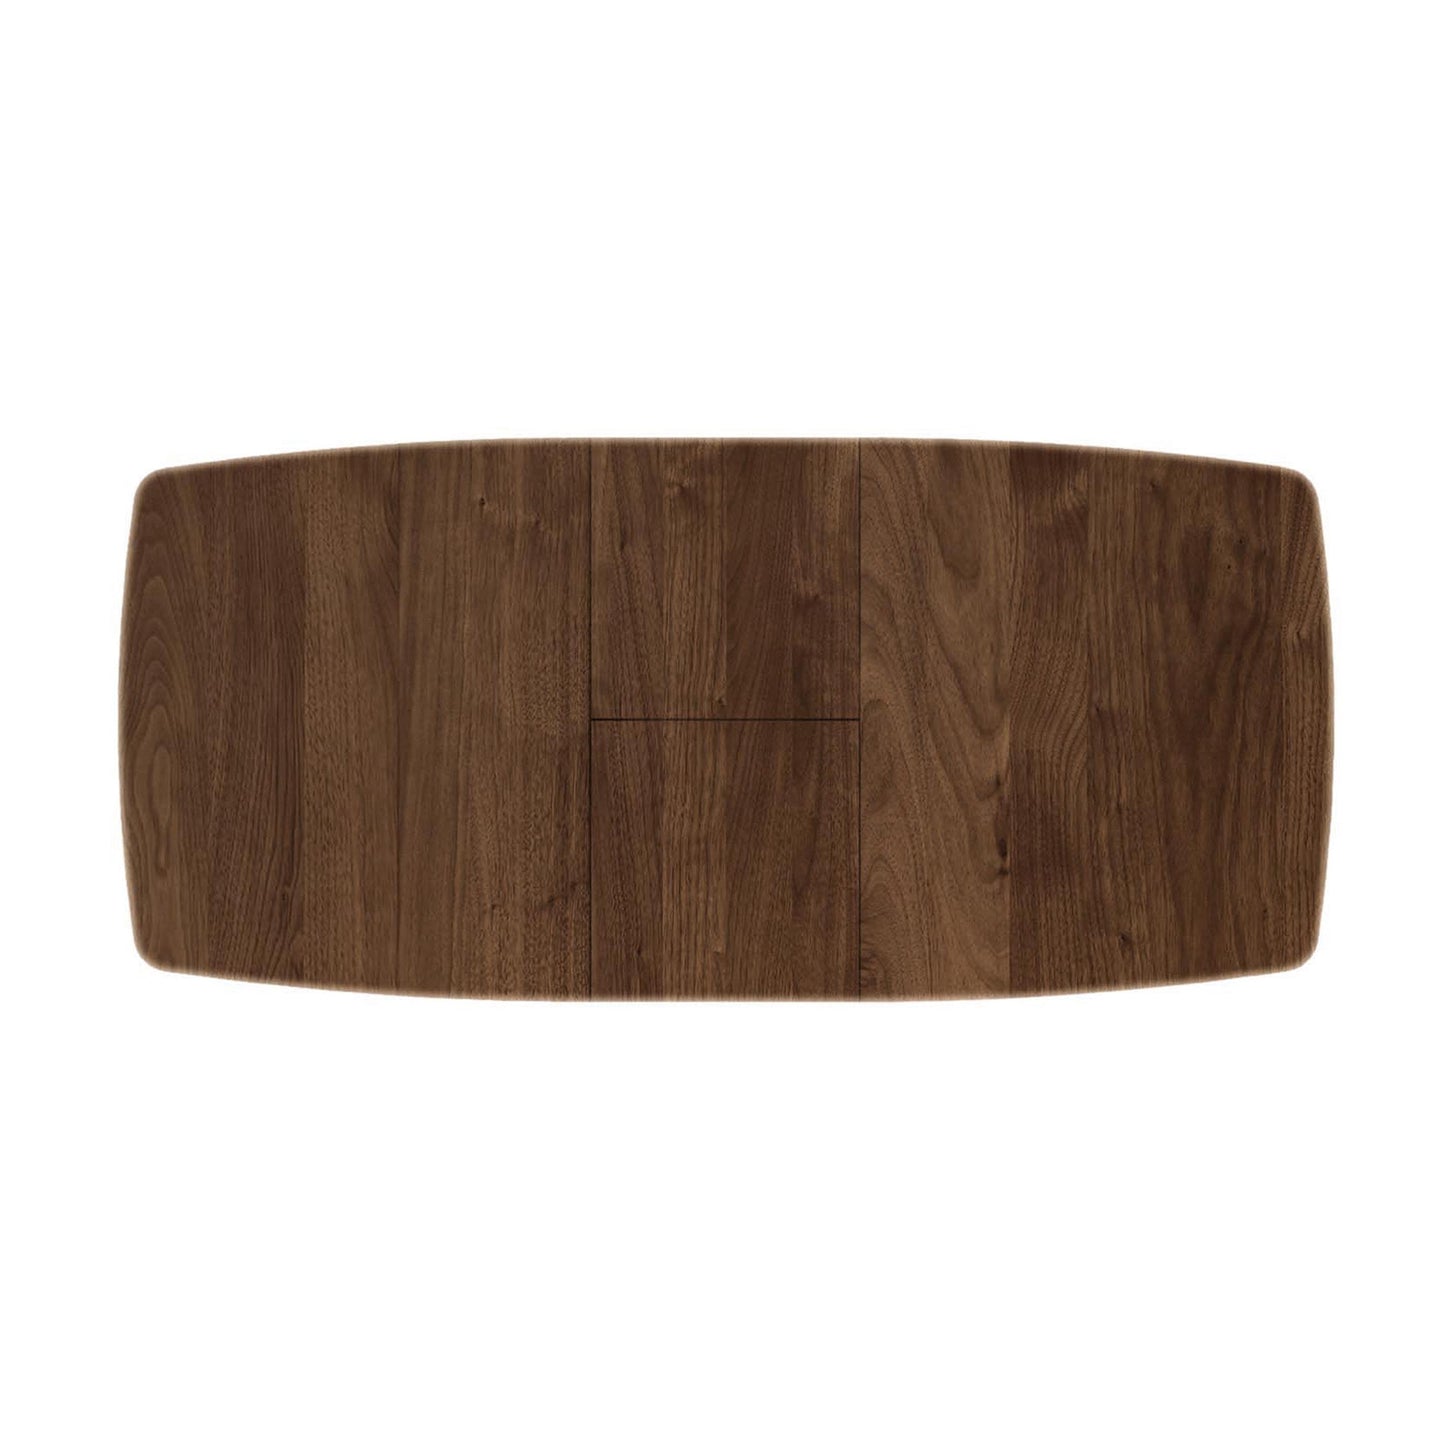 Top-down view of a Copeland Furniture Butterfly Extension Dining Table made from sustainably sourced American hardwoods. The solid wood dining table features a rectangular tabletop with natural woodgrain patterns, constructed from multiple wooden panels with slightly rounded edges and a dark brown finish. Perfect for modern dining rooms and American-made furniture enthusiasts.